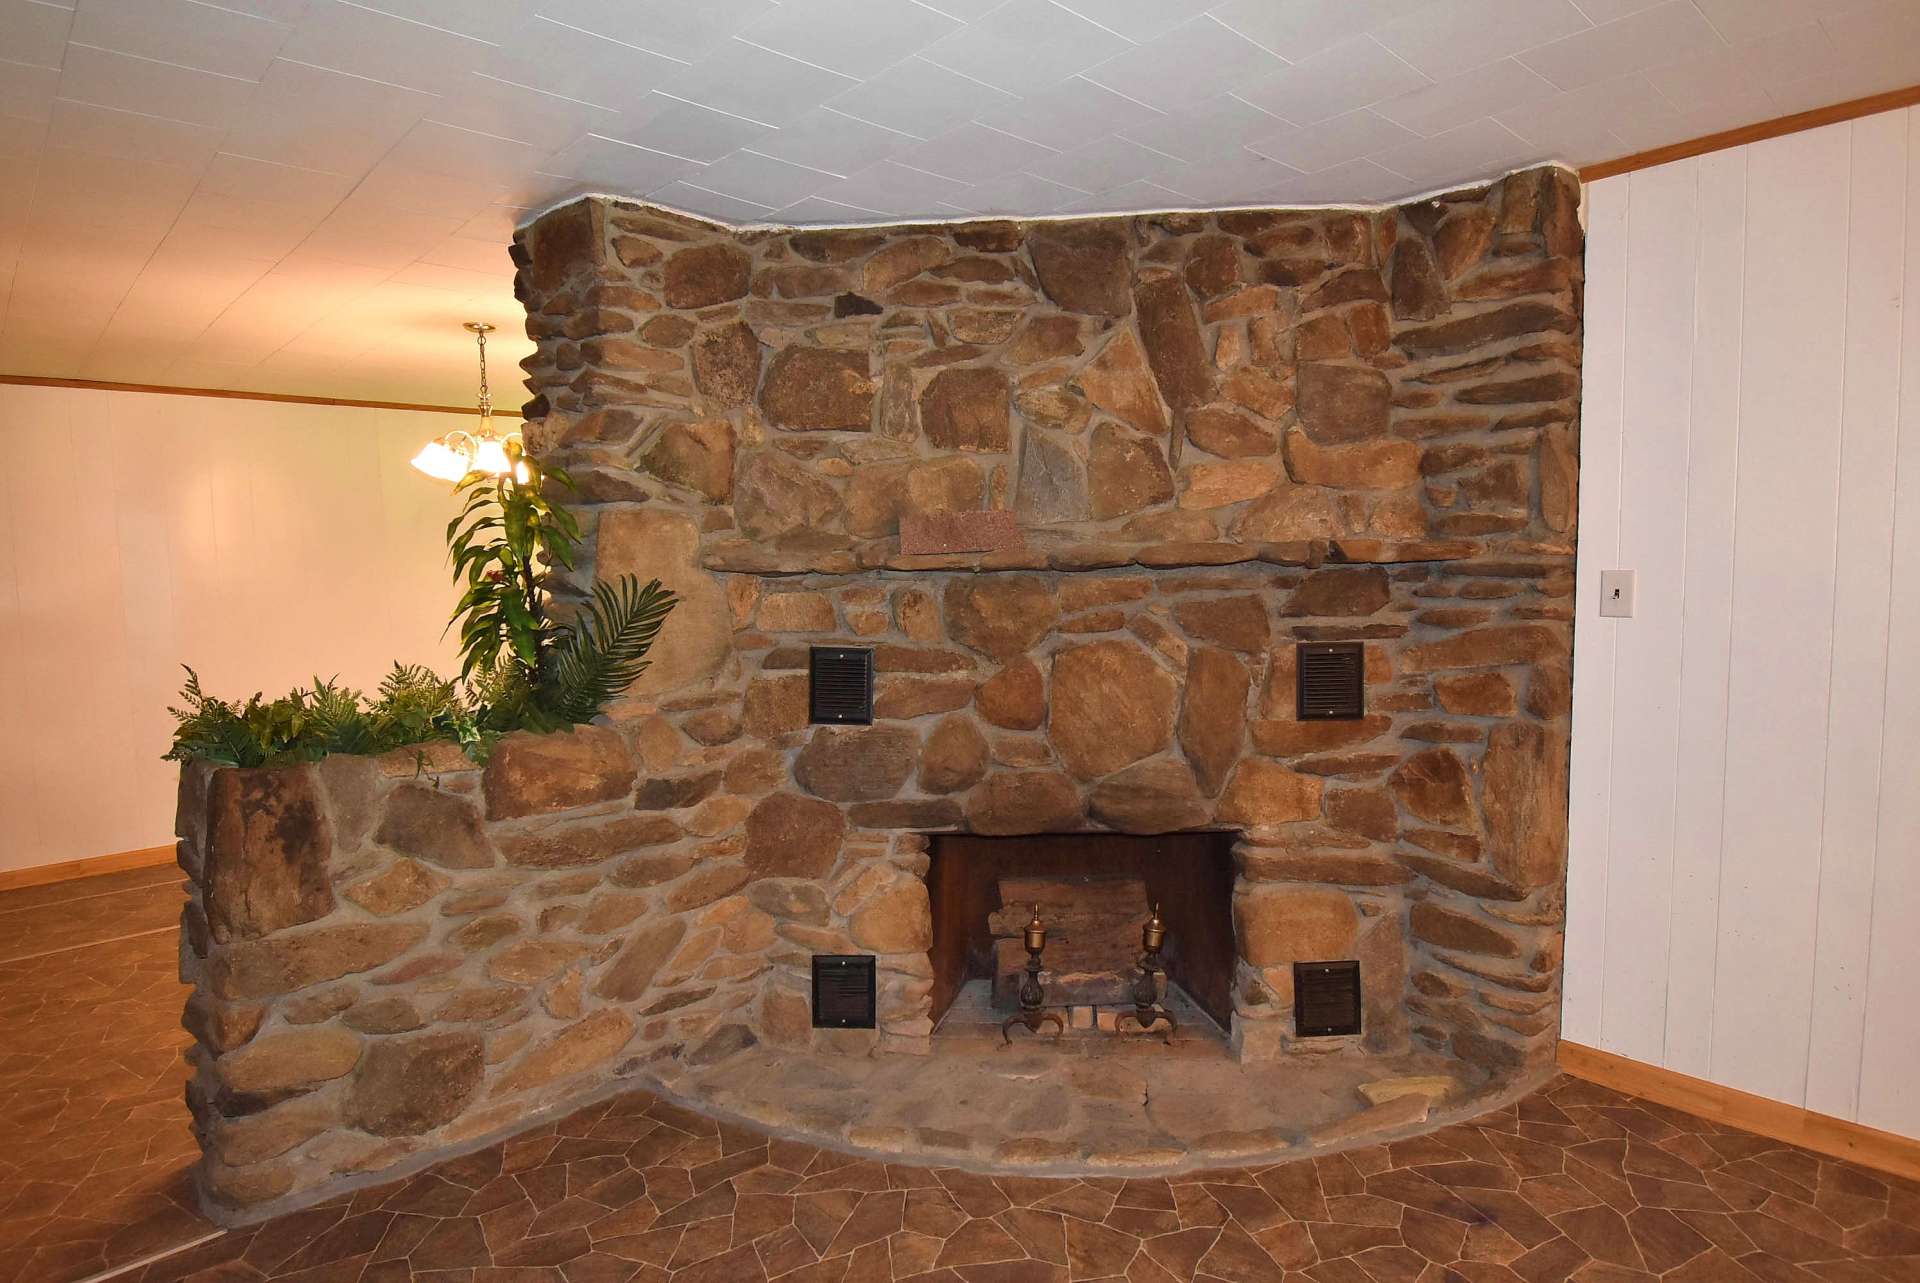 You will love spending  cool winter evenings in front of this fireplace with a crackling fire and the smell of home baked goodies coming from the kitchen.